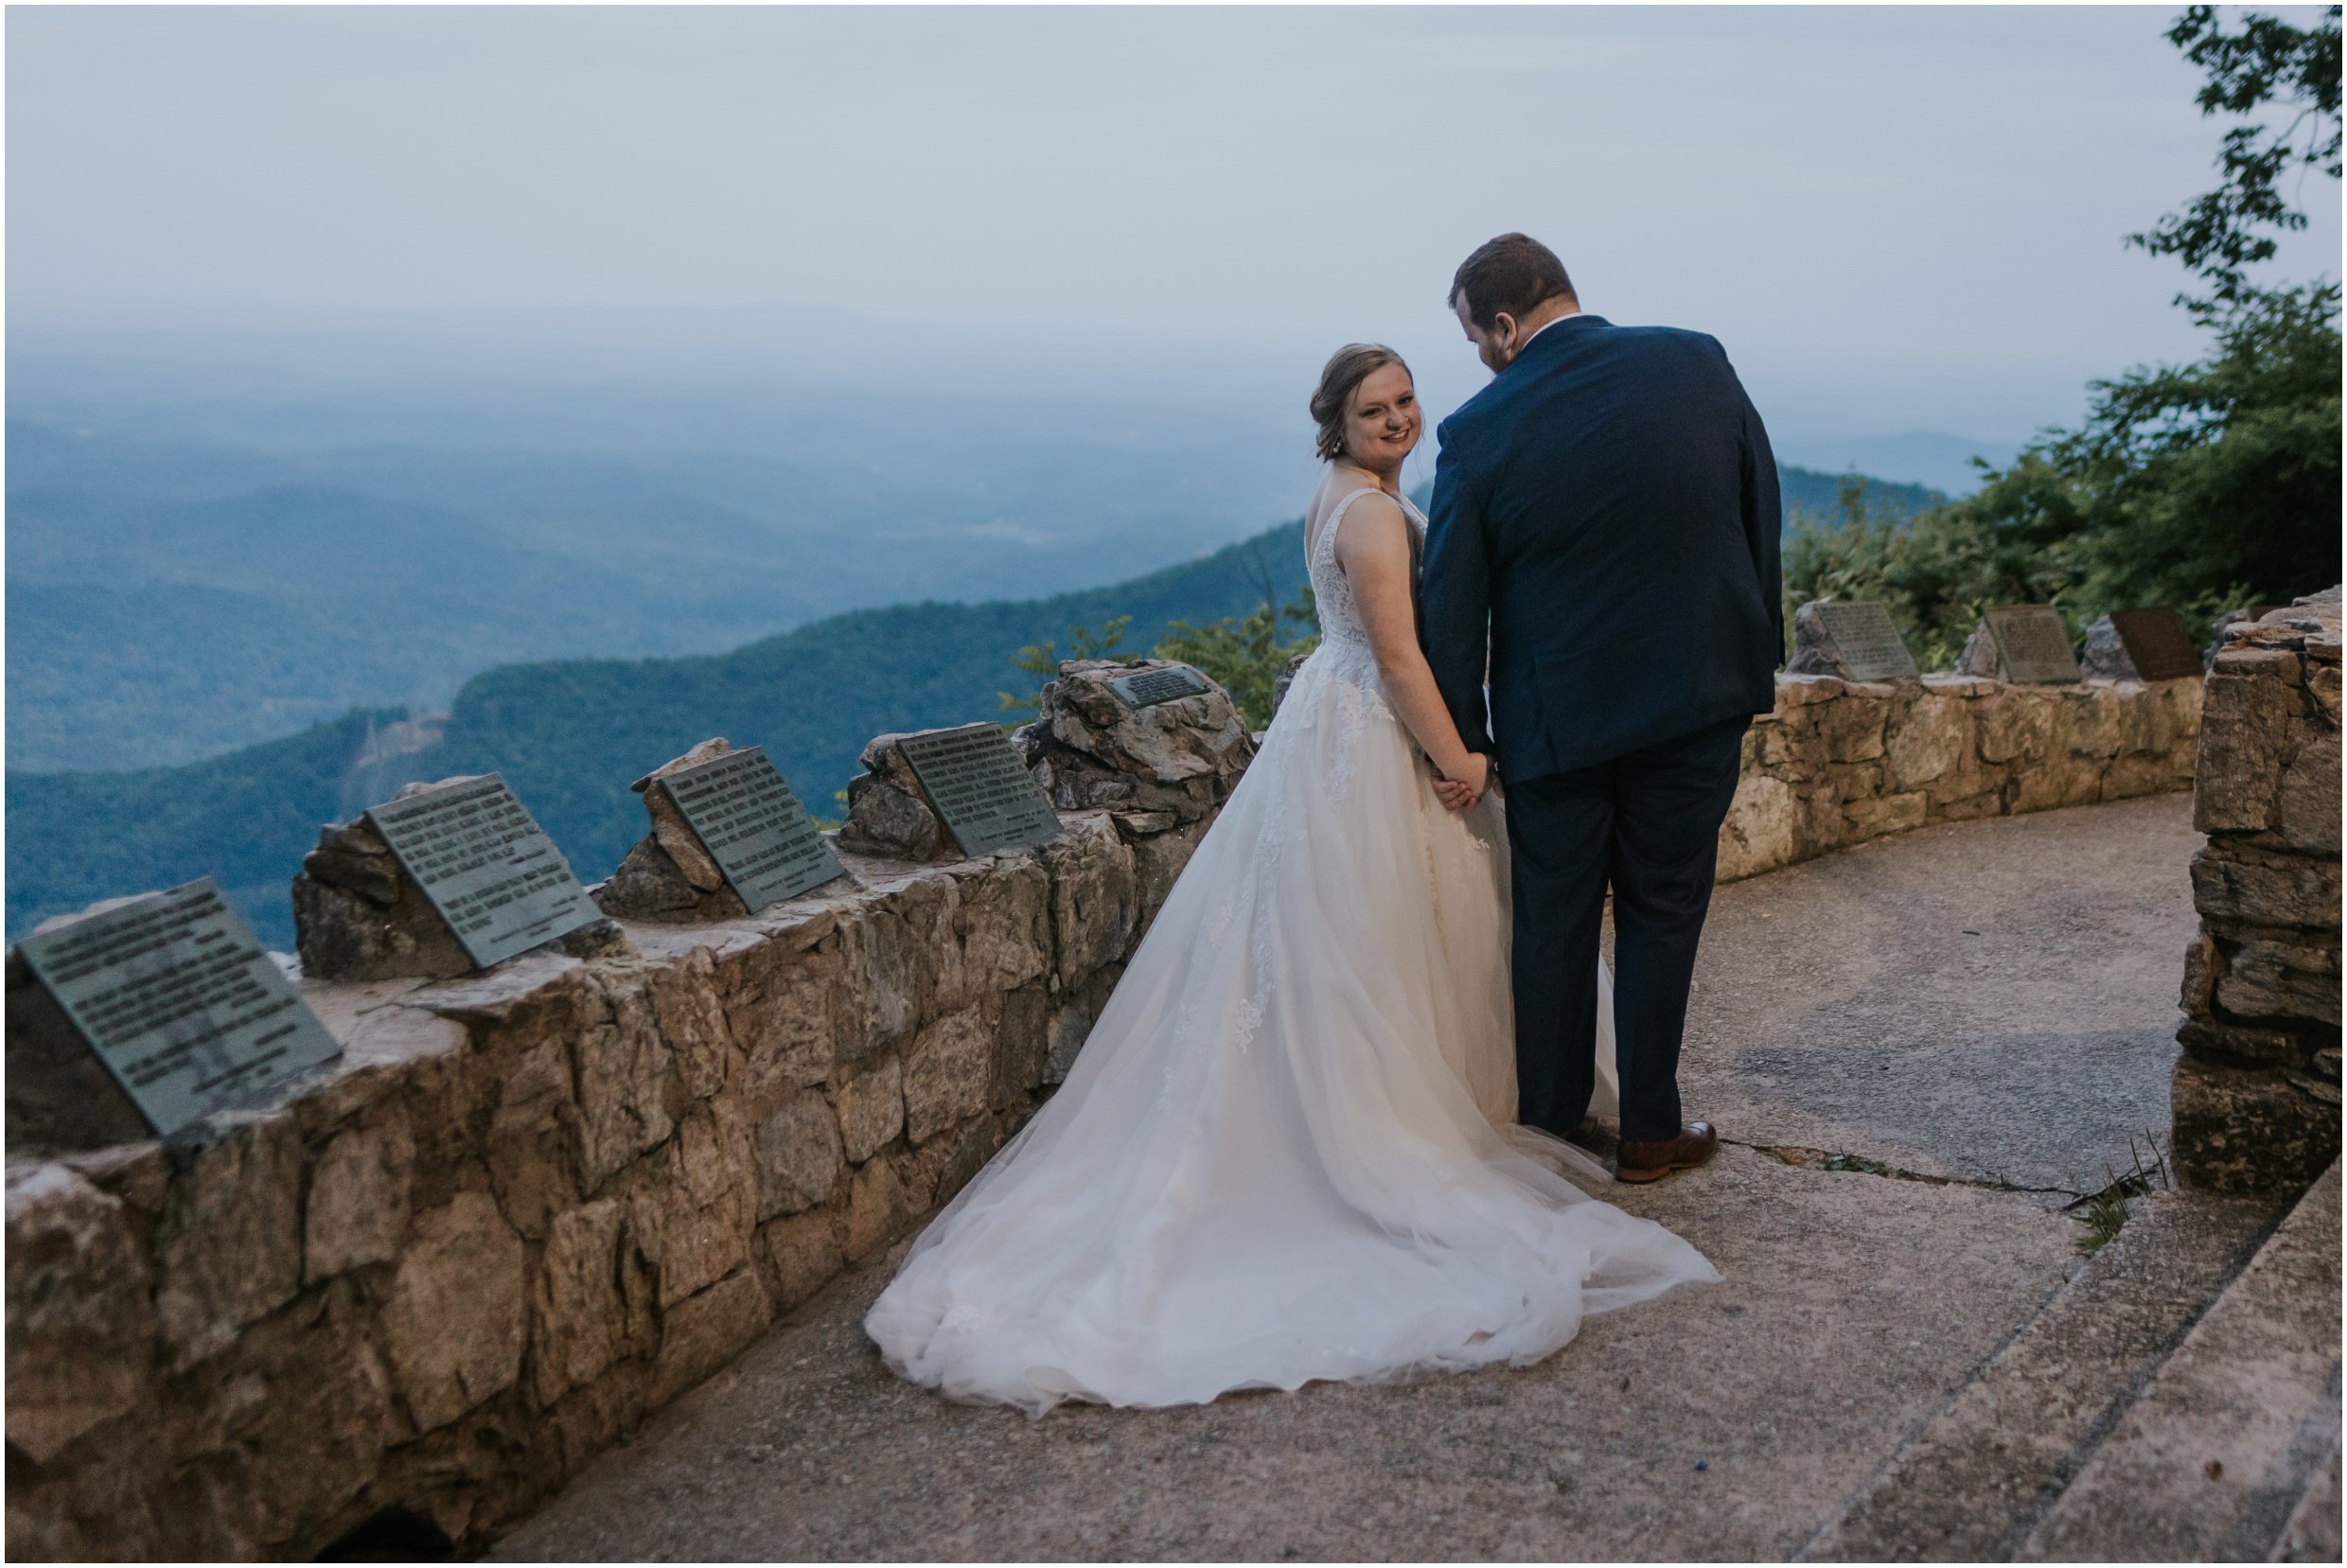 the-pretty-place-fred-symmes-chapel-greenville-sc-brevard-nc-camp-mountain-wedding-south-carolina-tennessee-katy-sergent-photography_0028.jpg